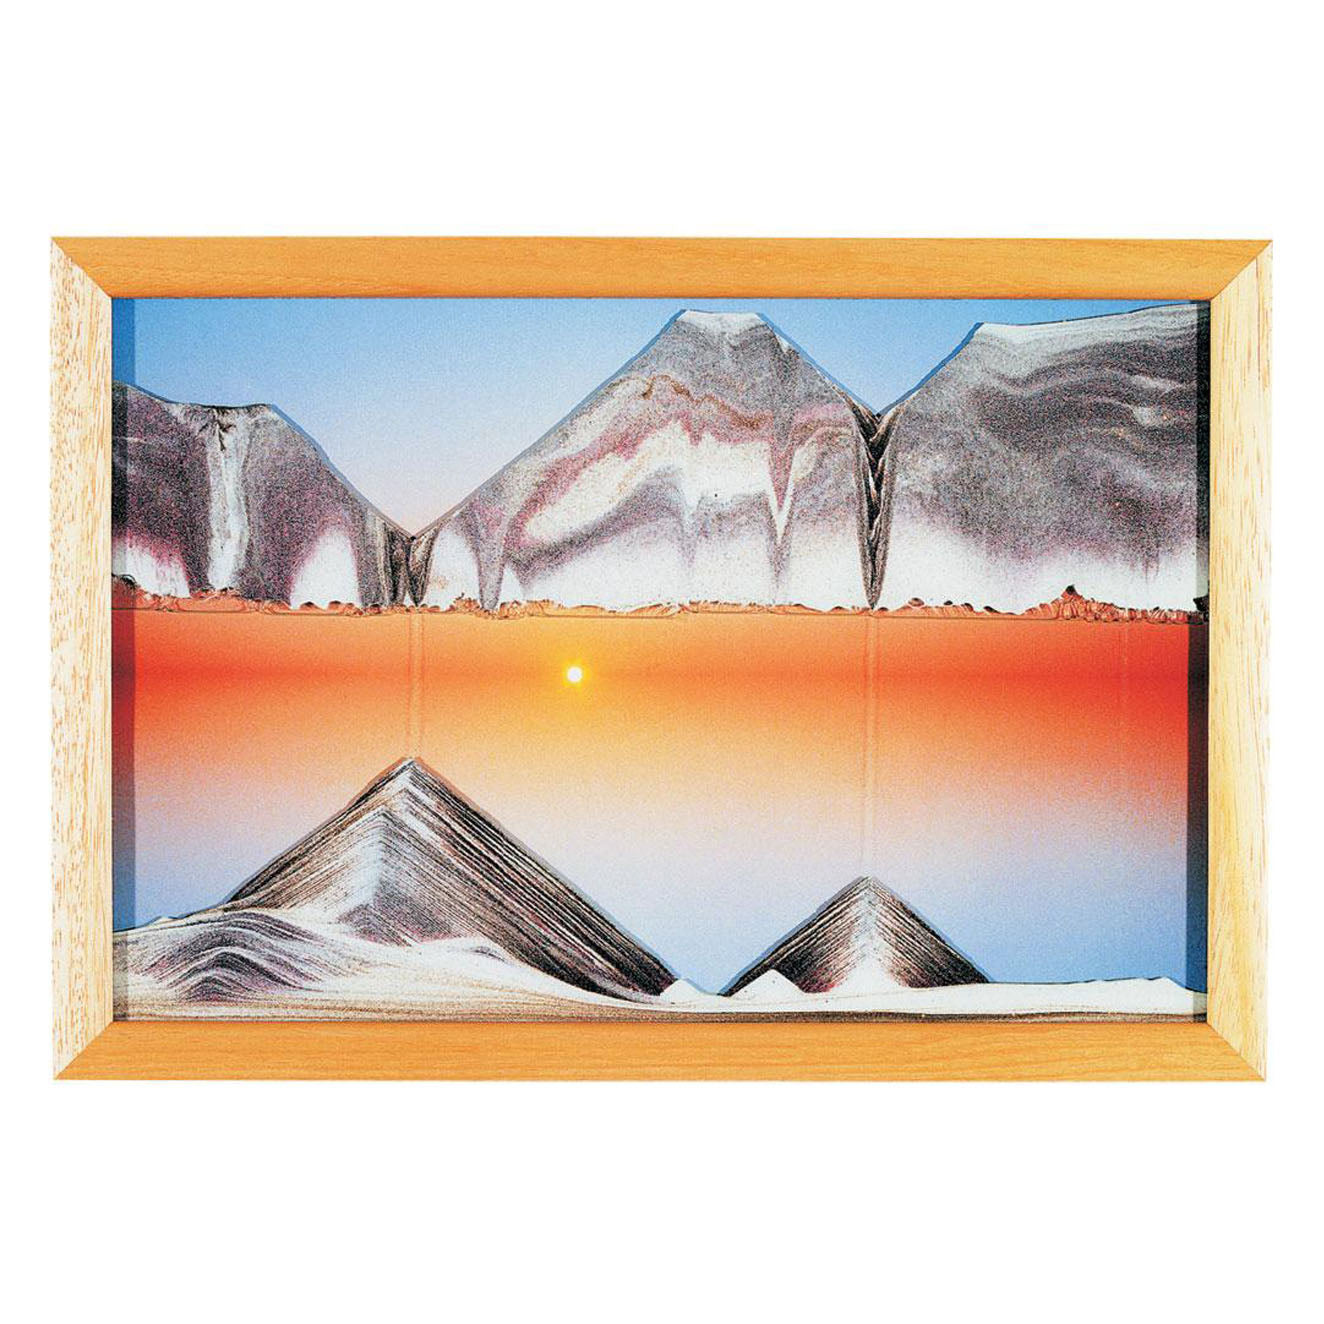 moving sand art pictures - Eclectic Treasures – Eclectic Treasures